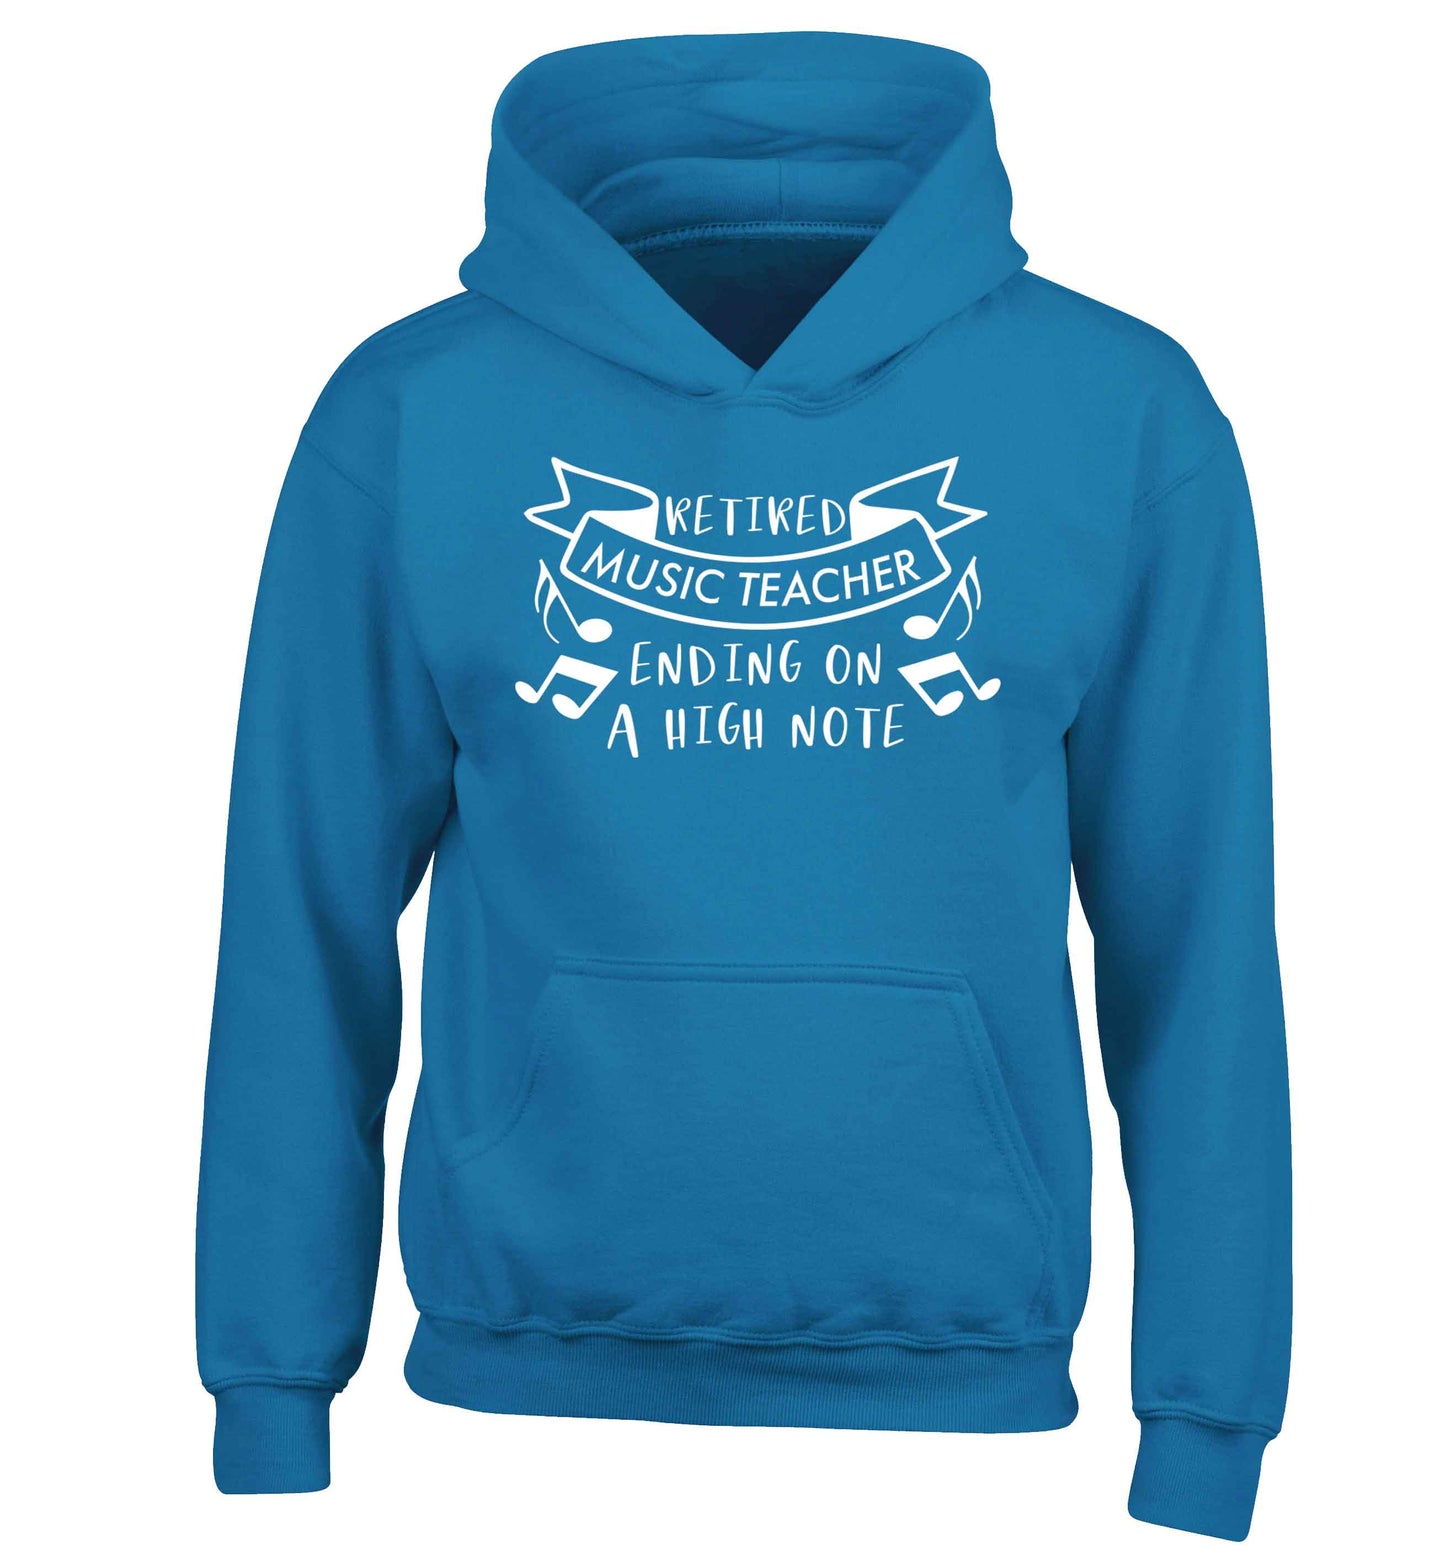 Retired music teacher ending on a high note children's blue hoodie 12-13 Years